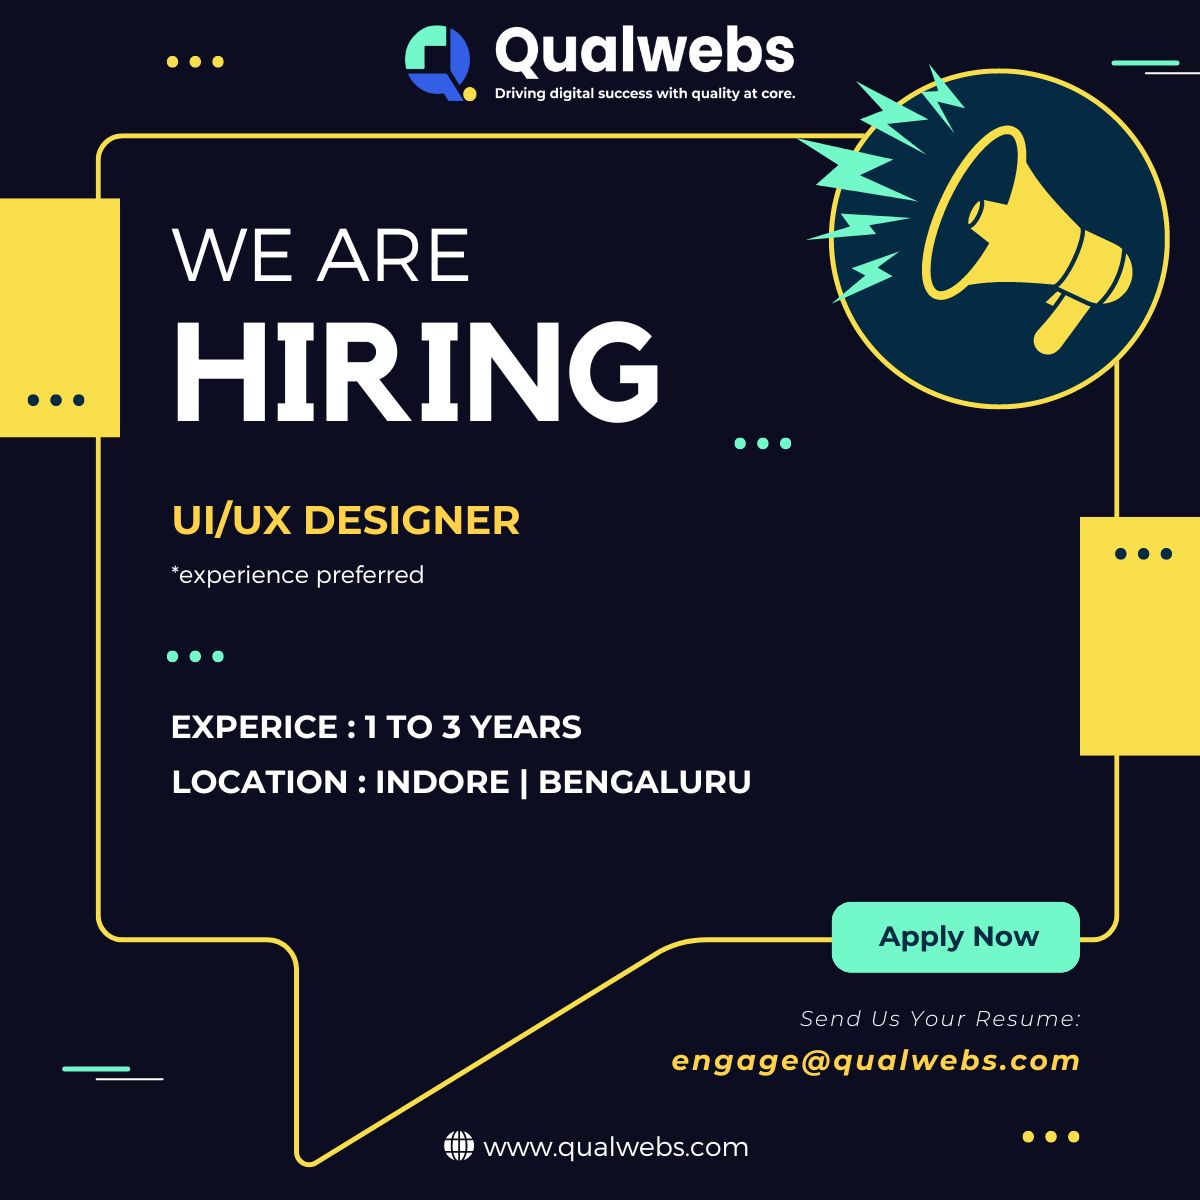 🚀 Exciting Opportunity Alert! Join @qualwebsInc as a UI/UX Designer! 

Ready to innovate and collaborate? Apply now or tag a friend who fits the bill! 

#UIUXDesigner #JobOpening #DesignCareer #HiringAlert #Qualwebs 🎨💼